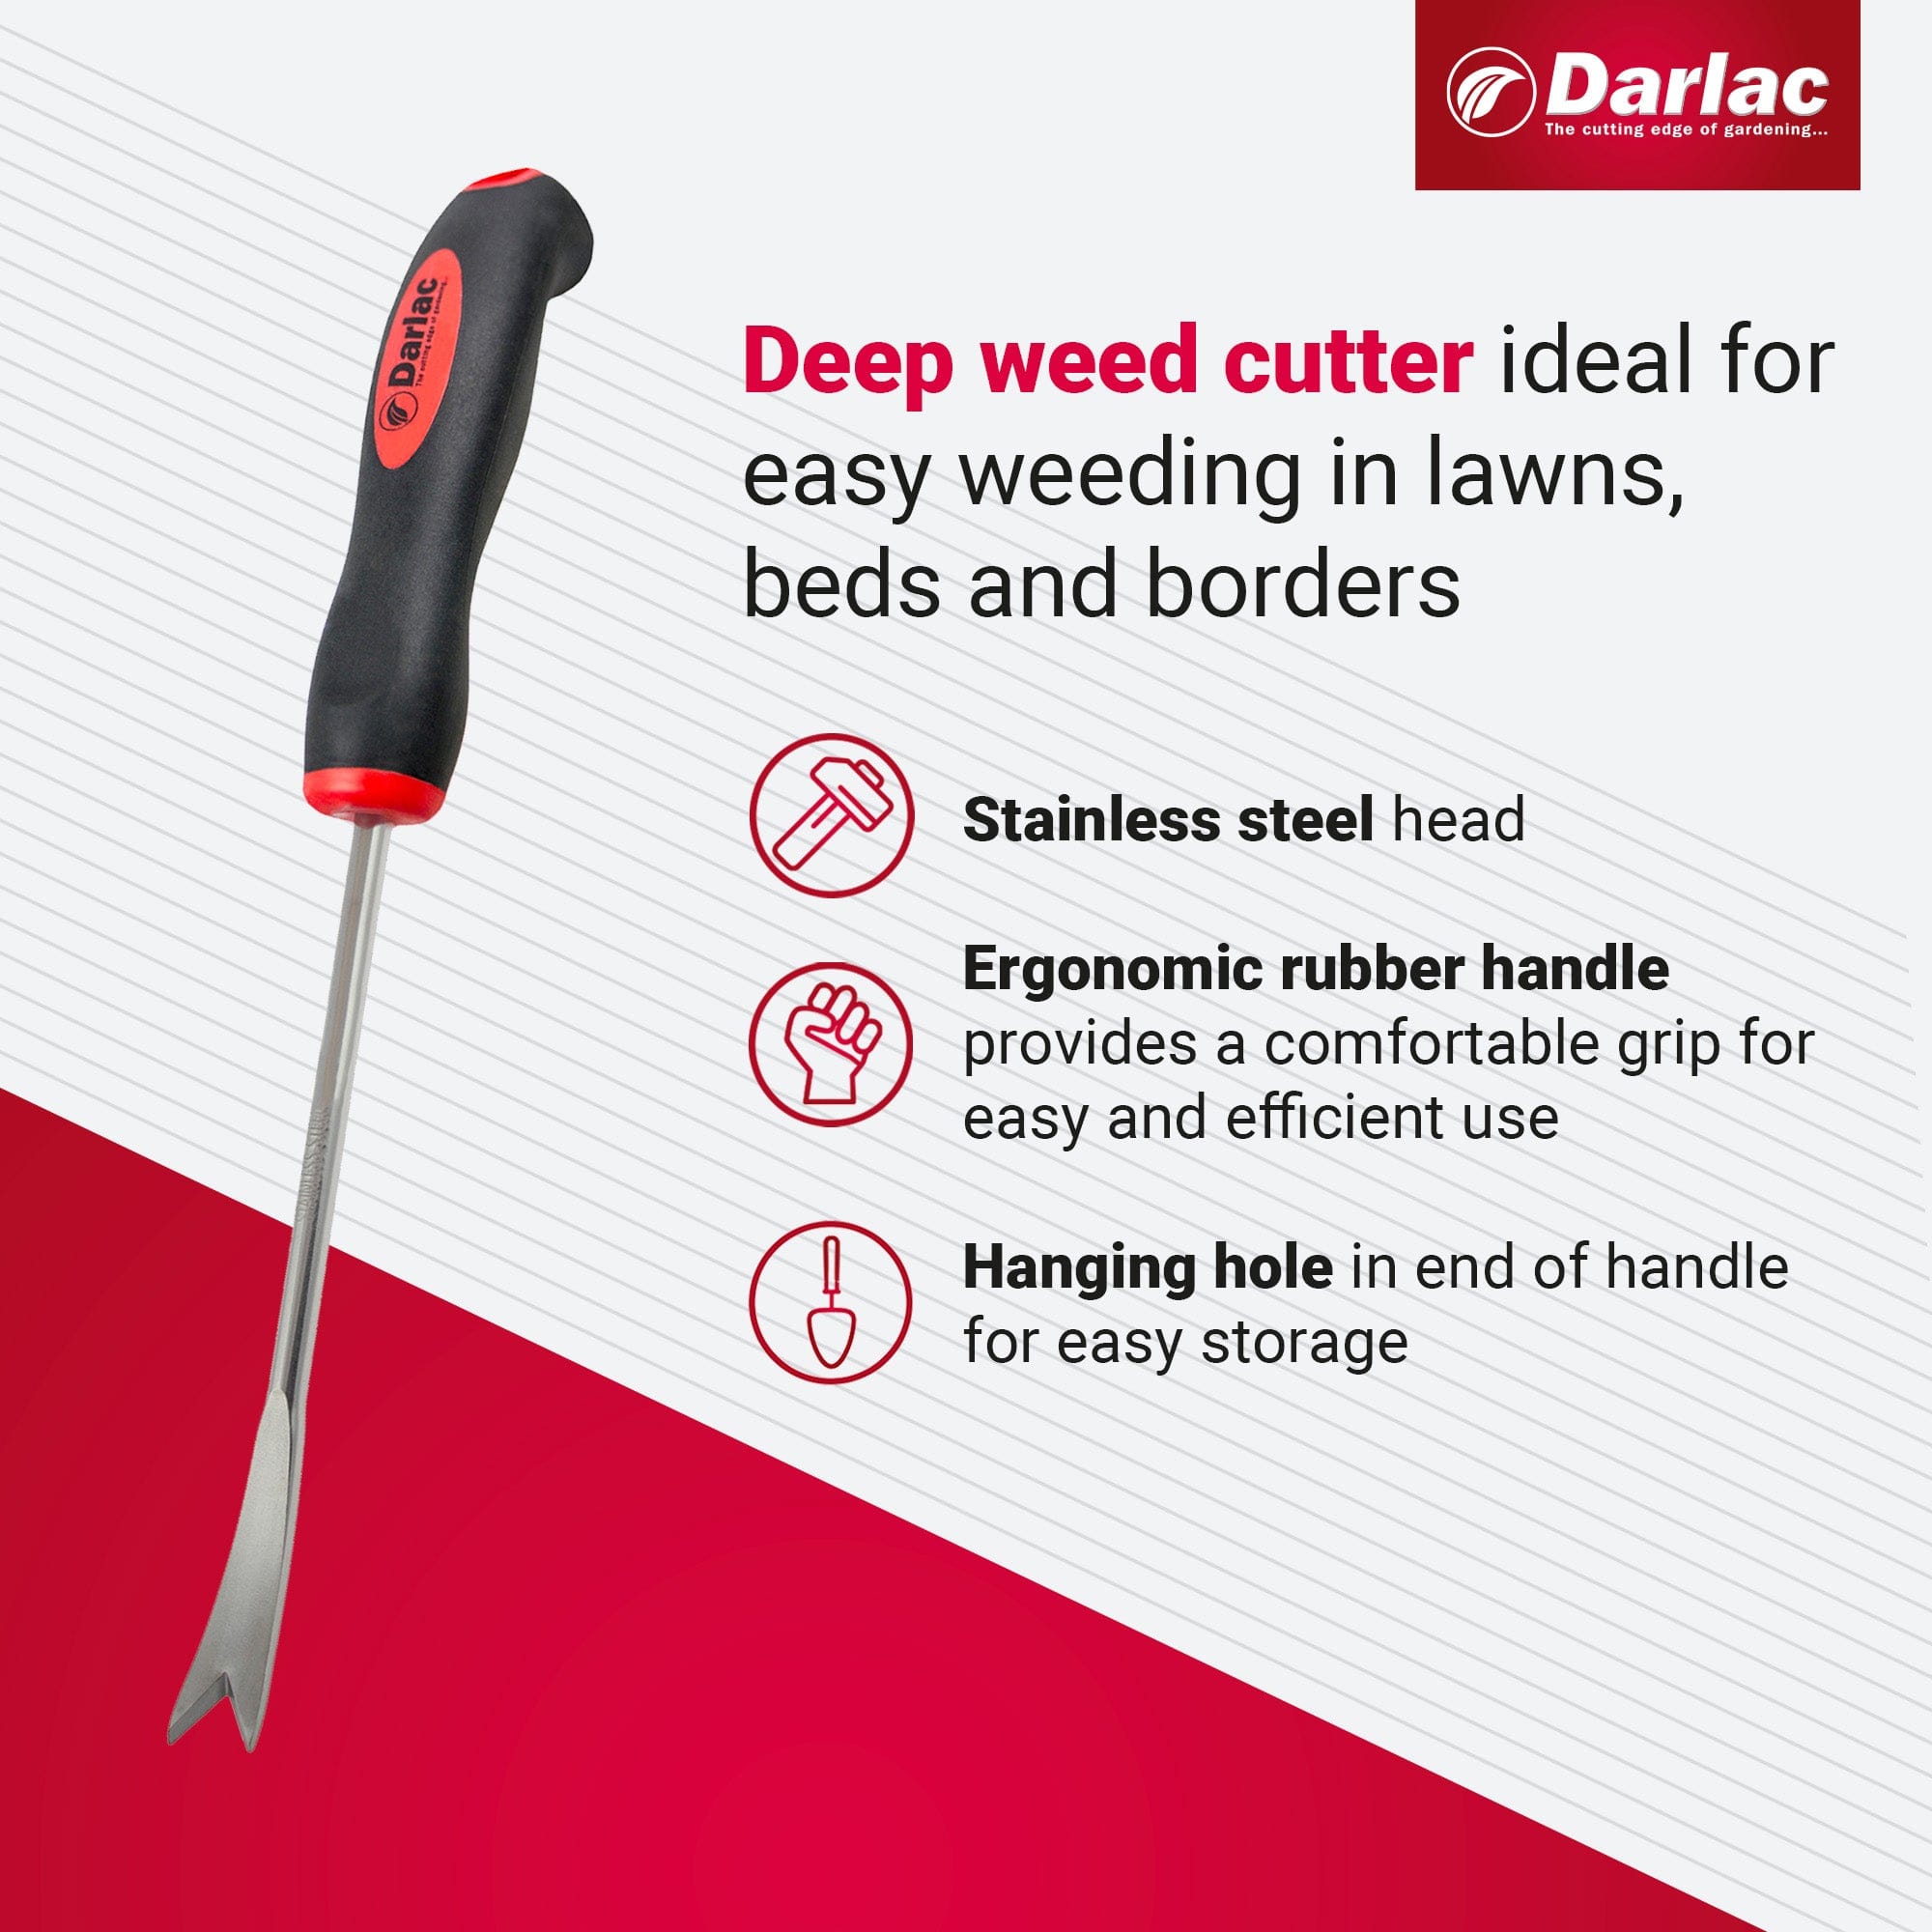 dt-brown HARDWARE Darlac Stainless Steel Deep Weed Cutter